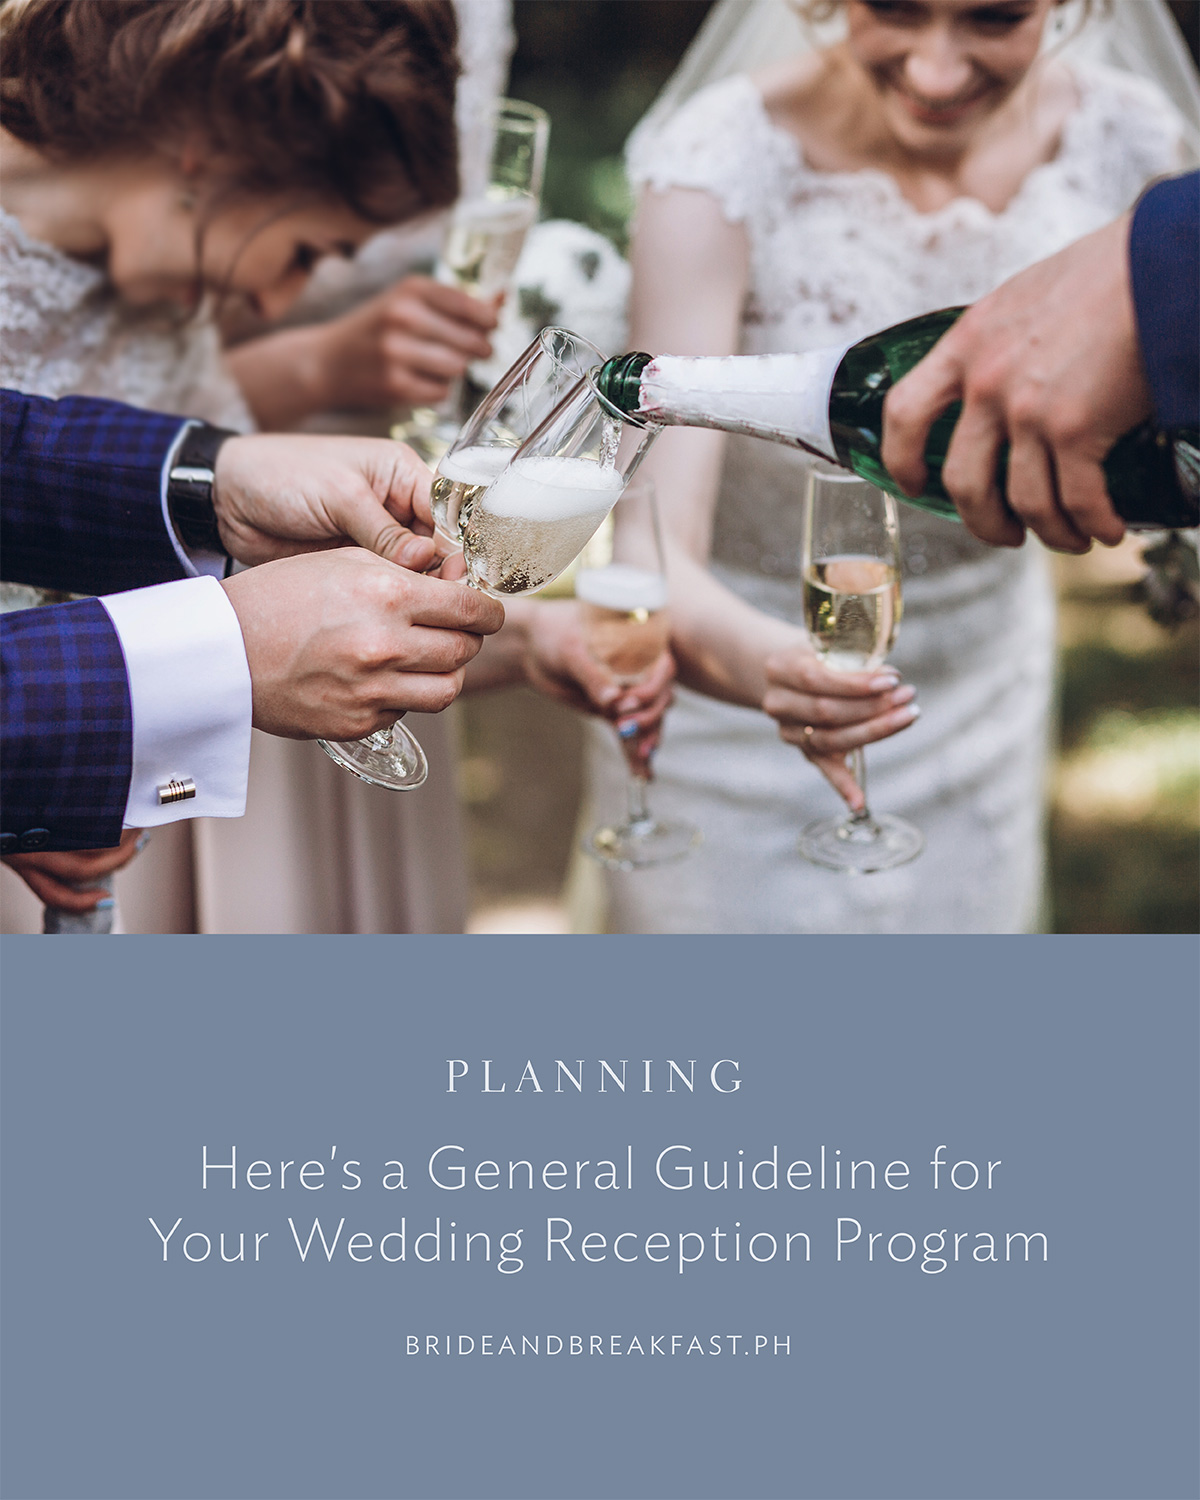 Planning Here's a General Guideline for Your Wedding Reception Program